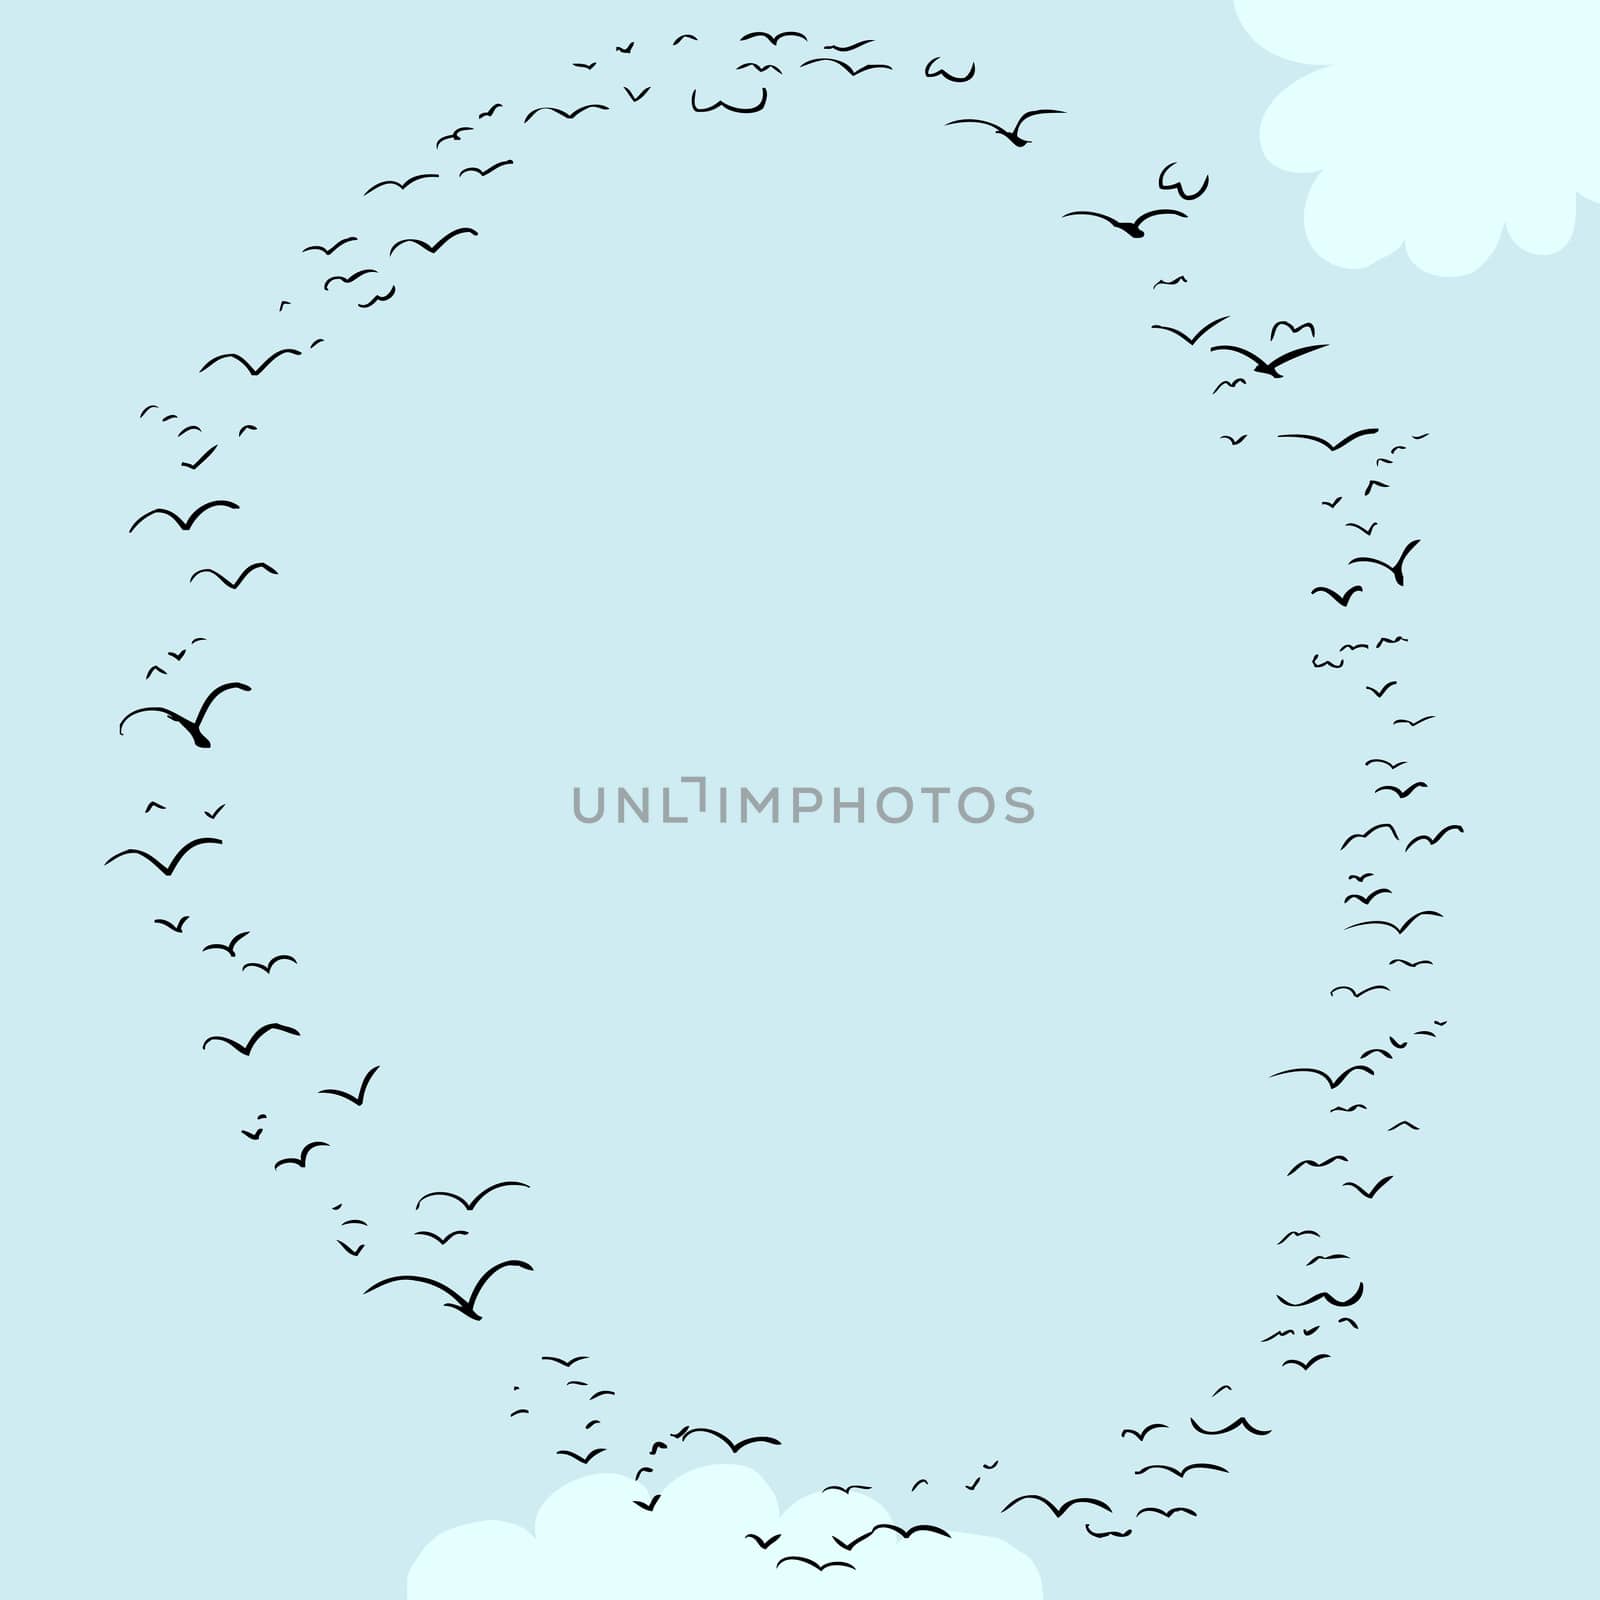 Illustration of a flock of birds in the shape of the letter o